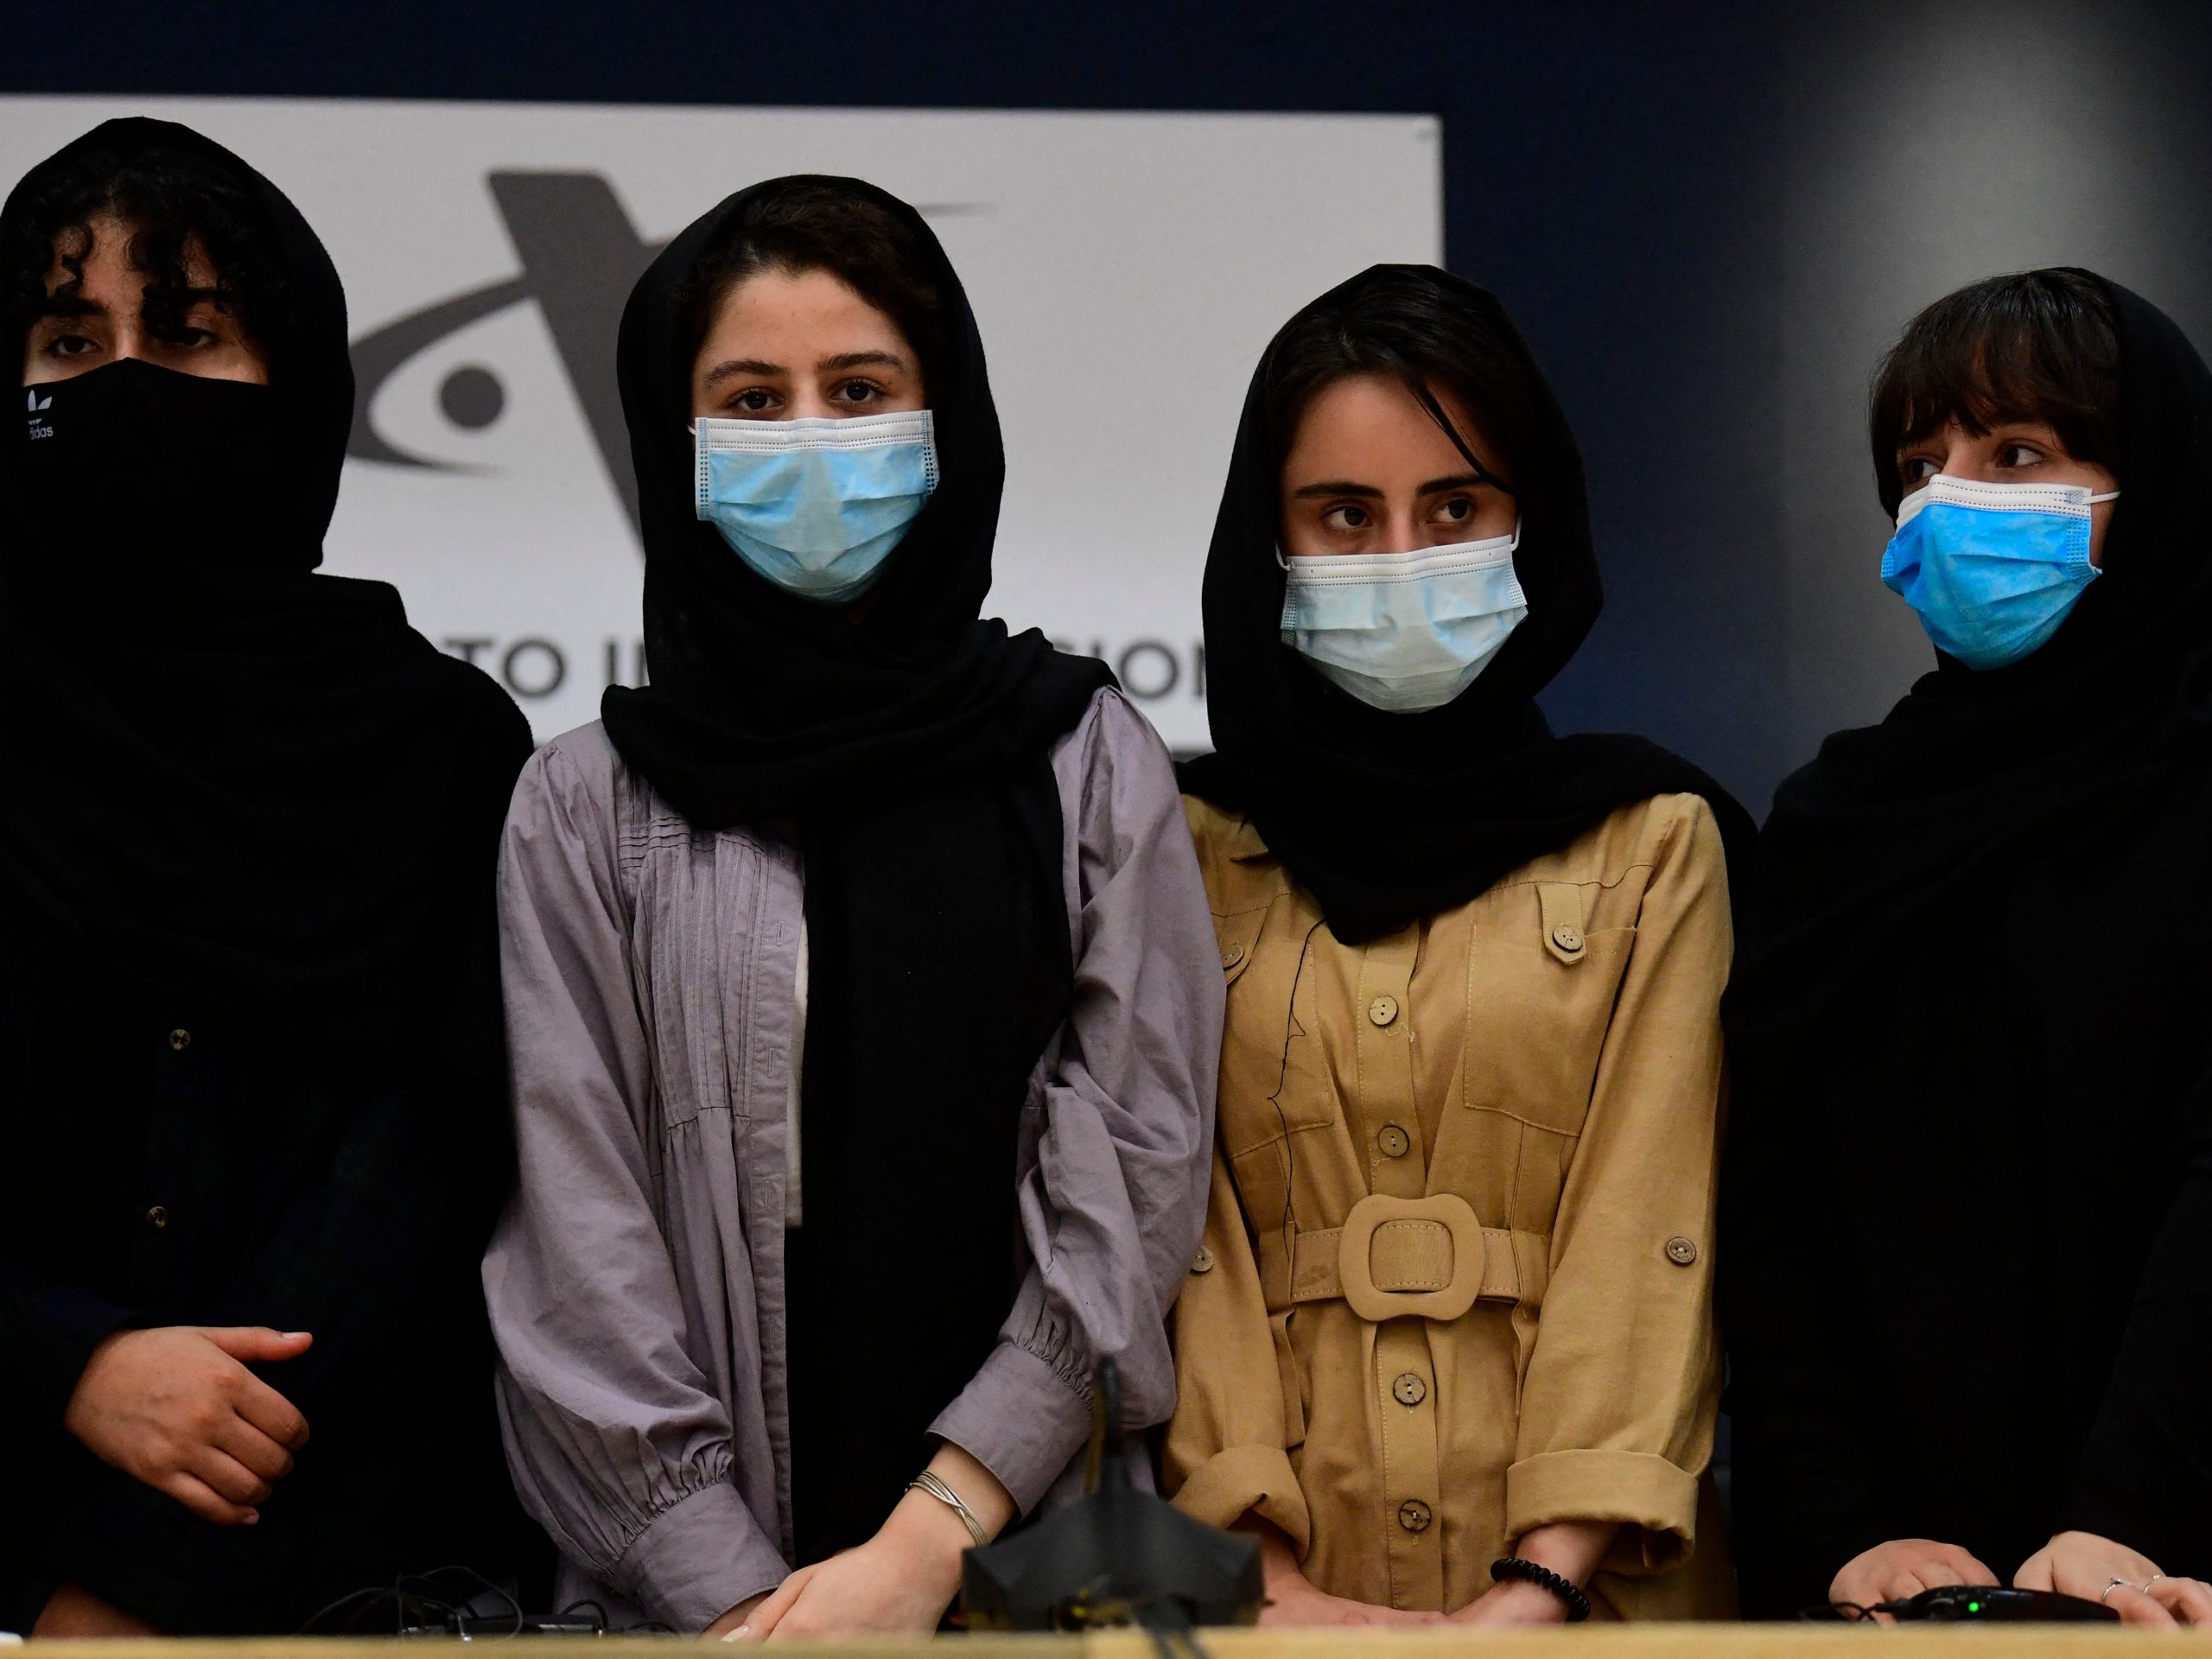 Four Afghan women, members of the Afghanistan Robotic team, pose for a picture during their arrival to Mexico after asking for refuge, at the Benito Juarez International Airport in Mexico City, on August 24, 2021